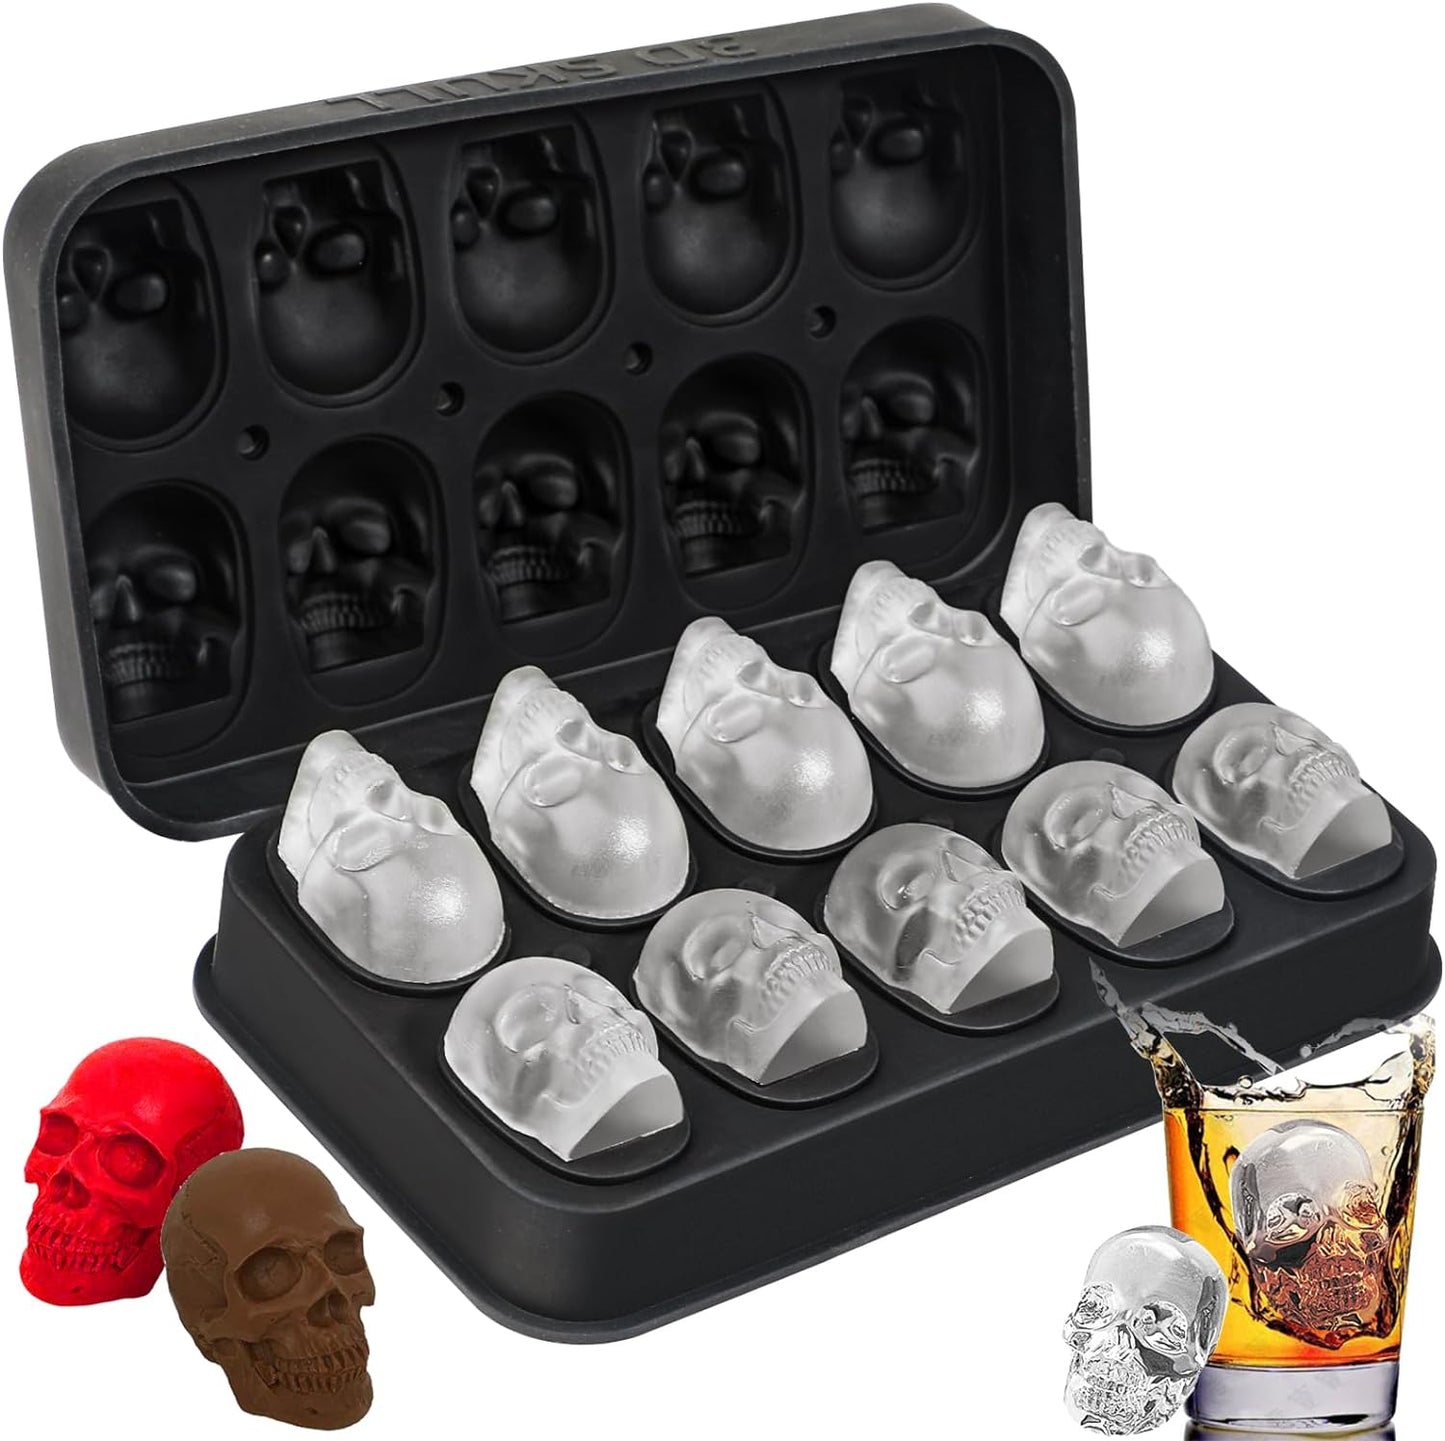 Webake 10 Cavity Halloween Silicone Skull Ice Cube Mold with Lid